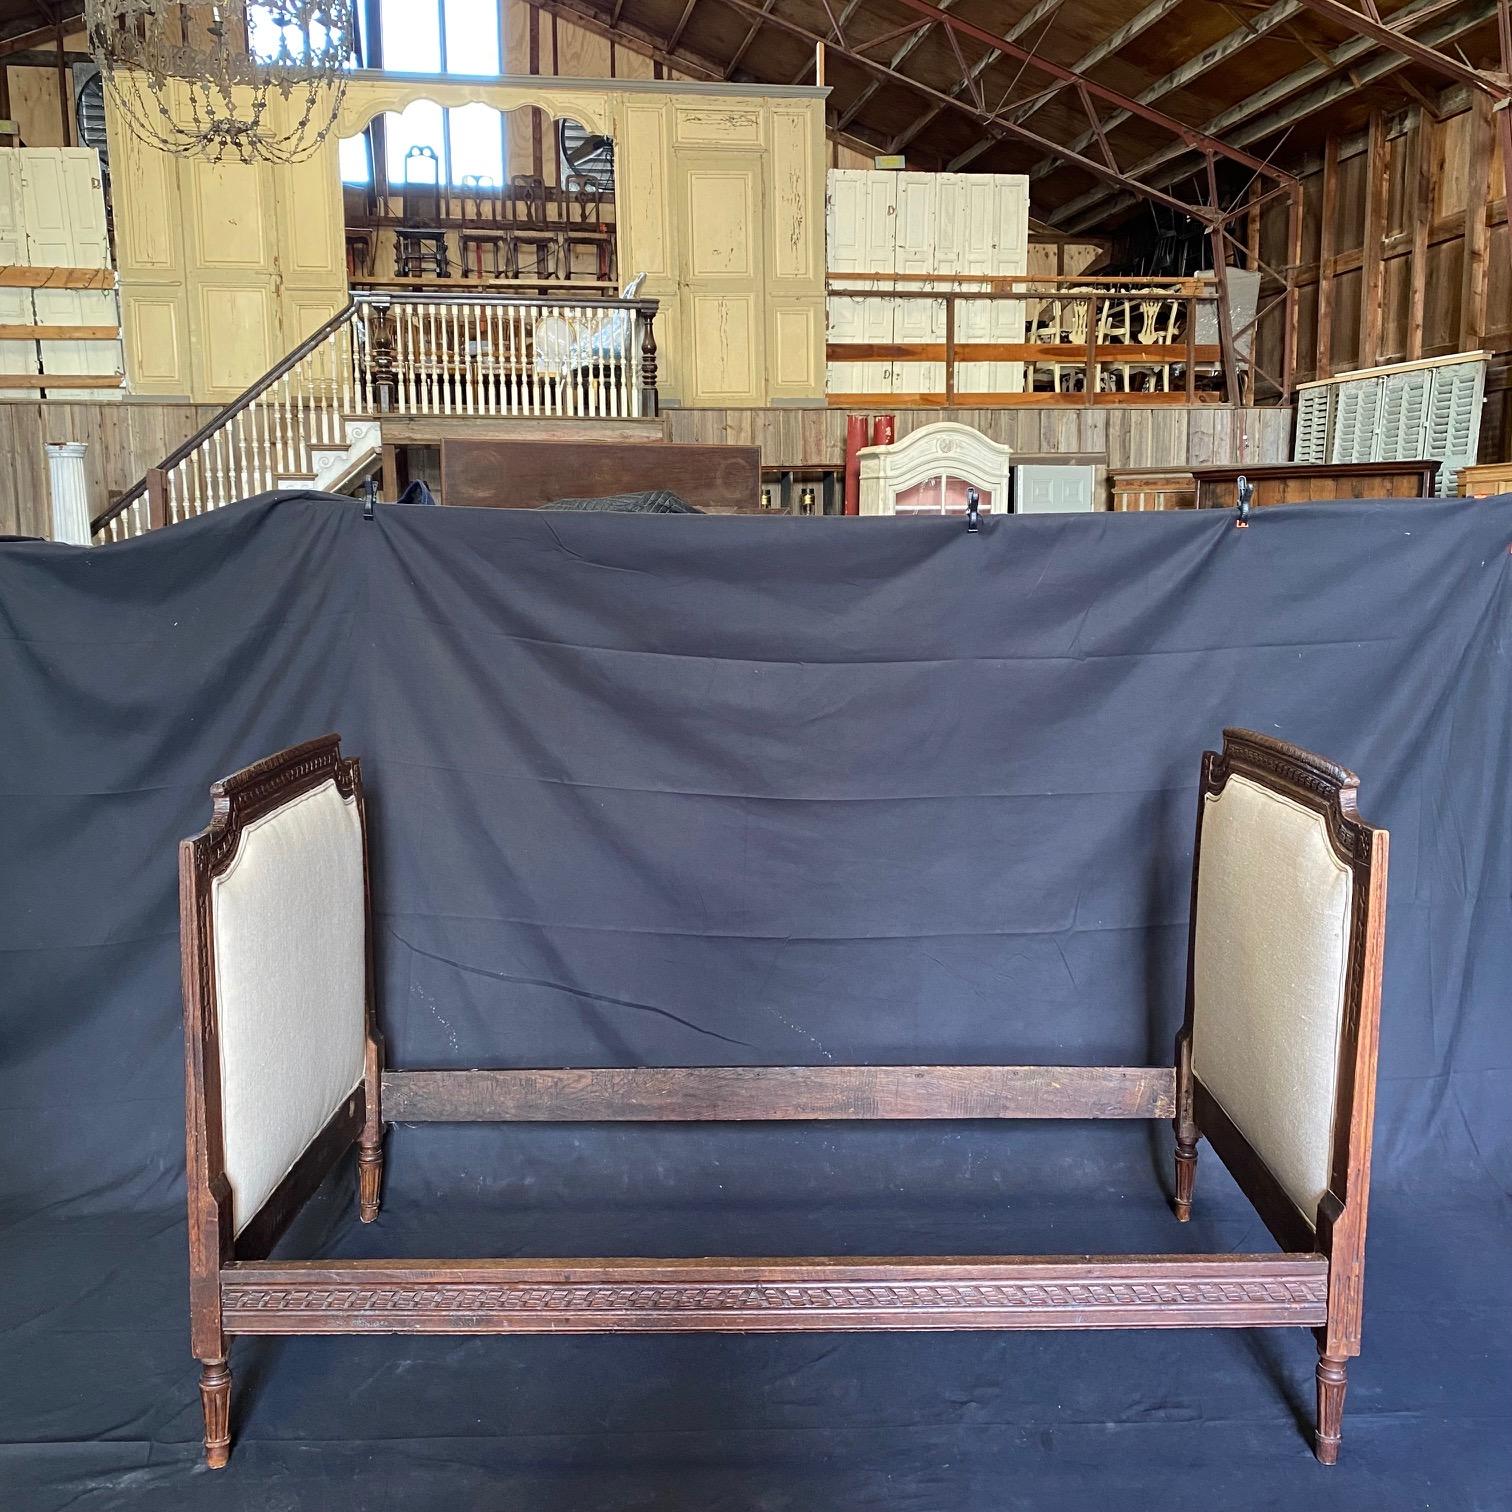 18th century Elizabethan oak carved bed. Early and intricately carved legs and stretchers. Wonderful age and patina updated with new upholstery. Does not come with mattress; needs custom mattress. #4031

 H rails 13” W inside 69.5” D inside